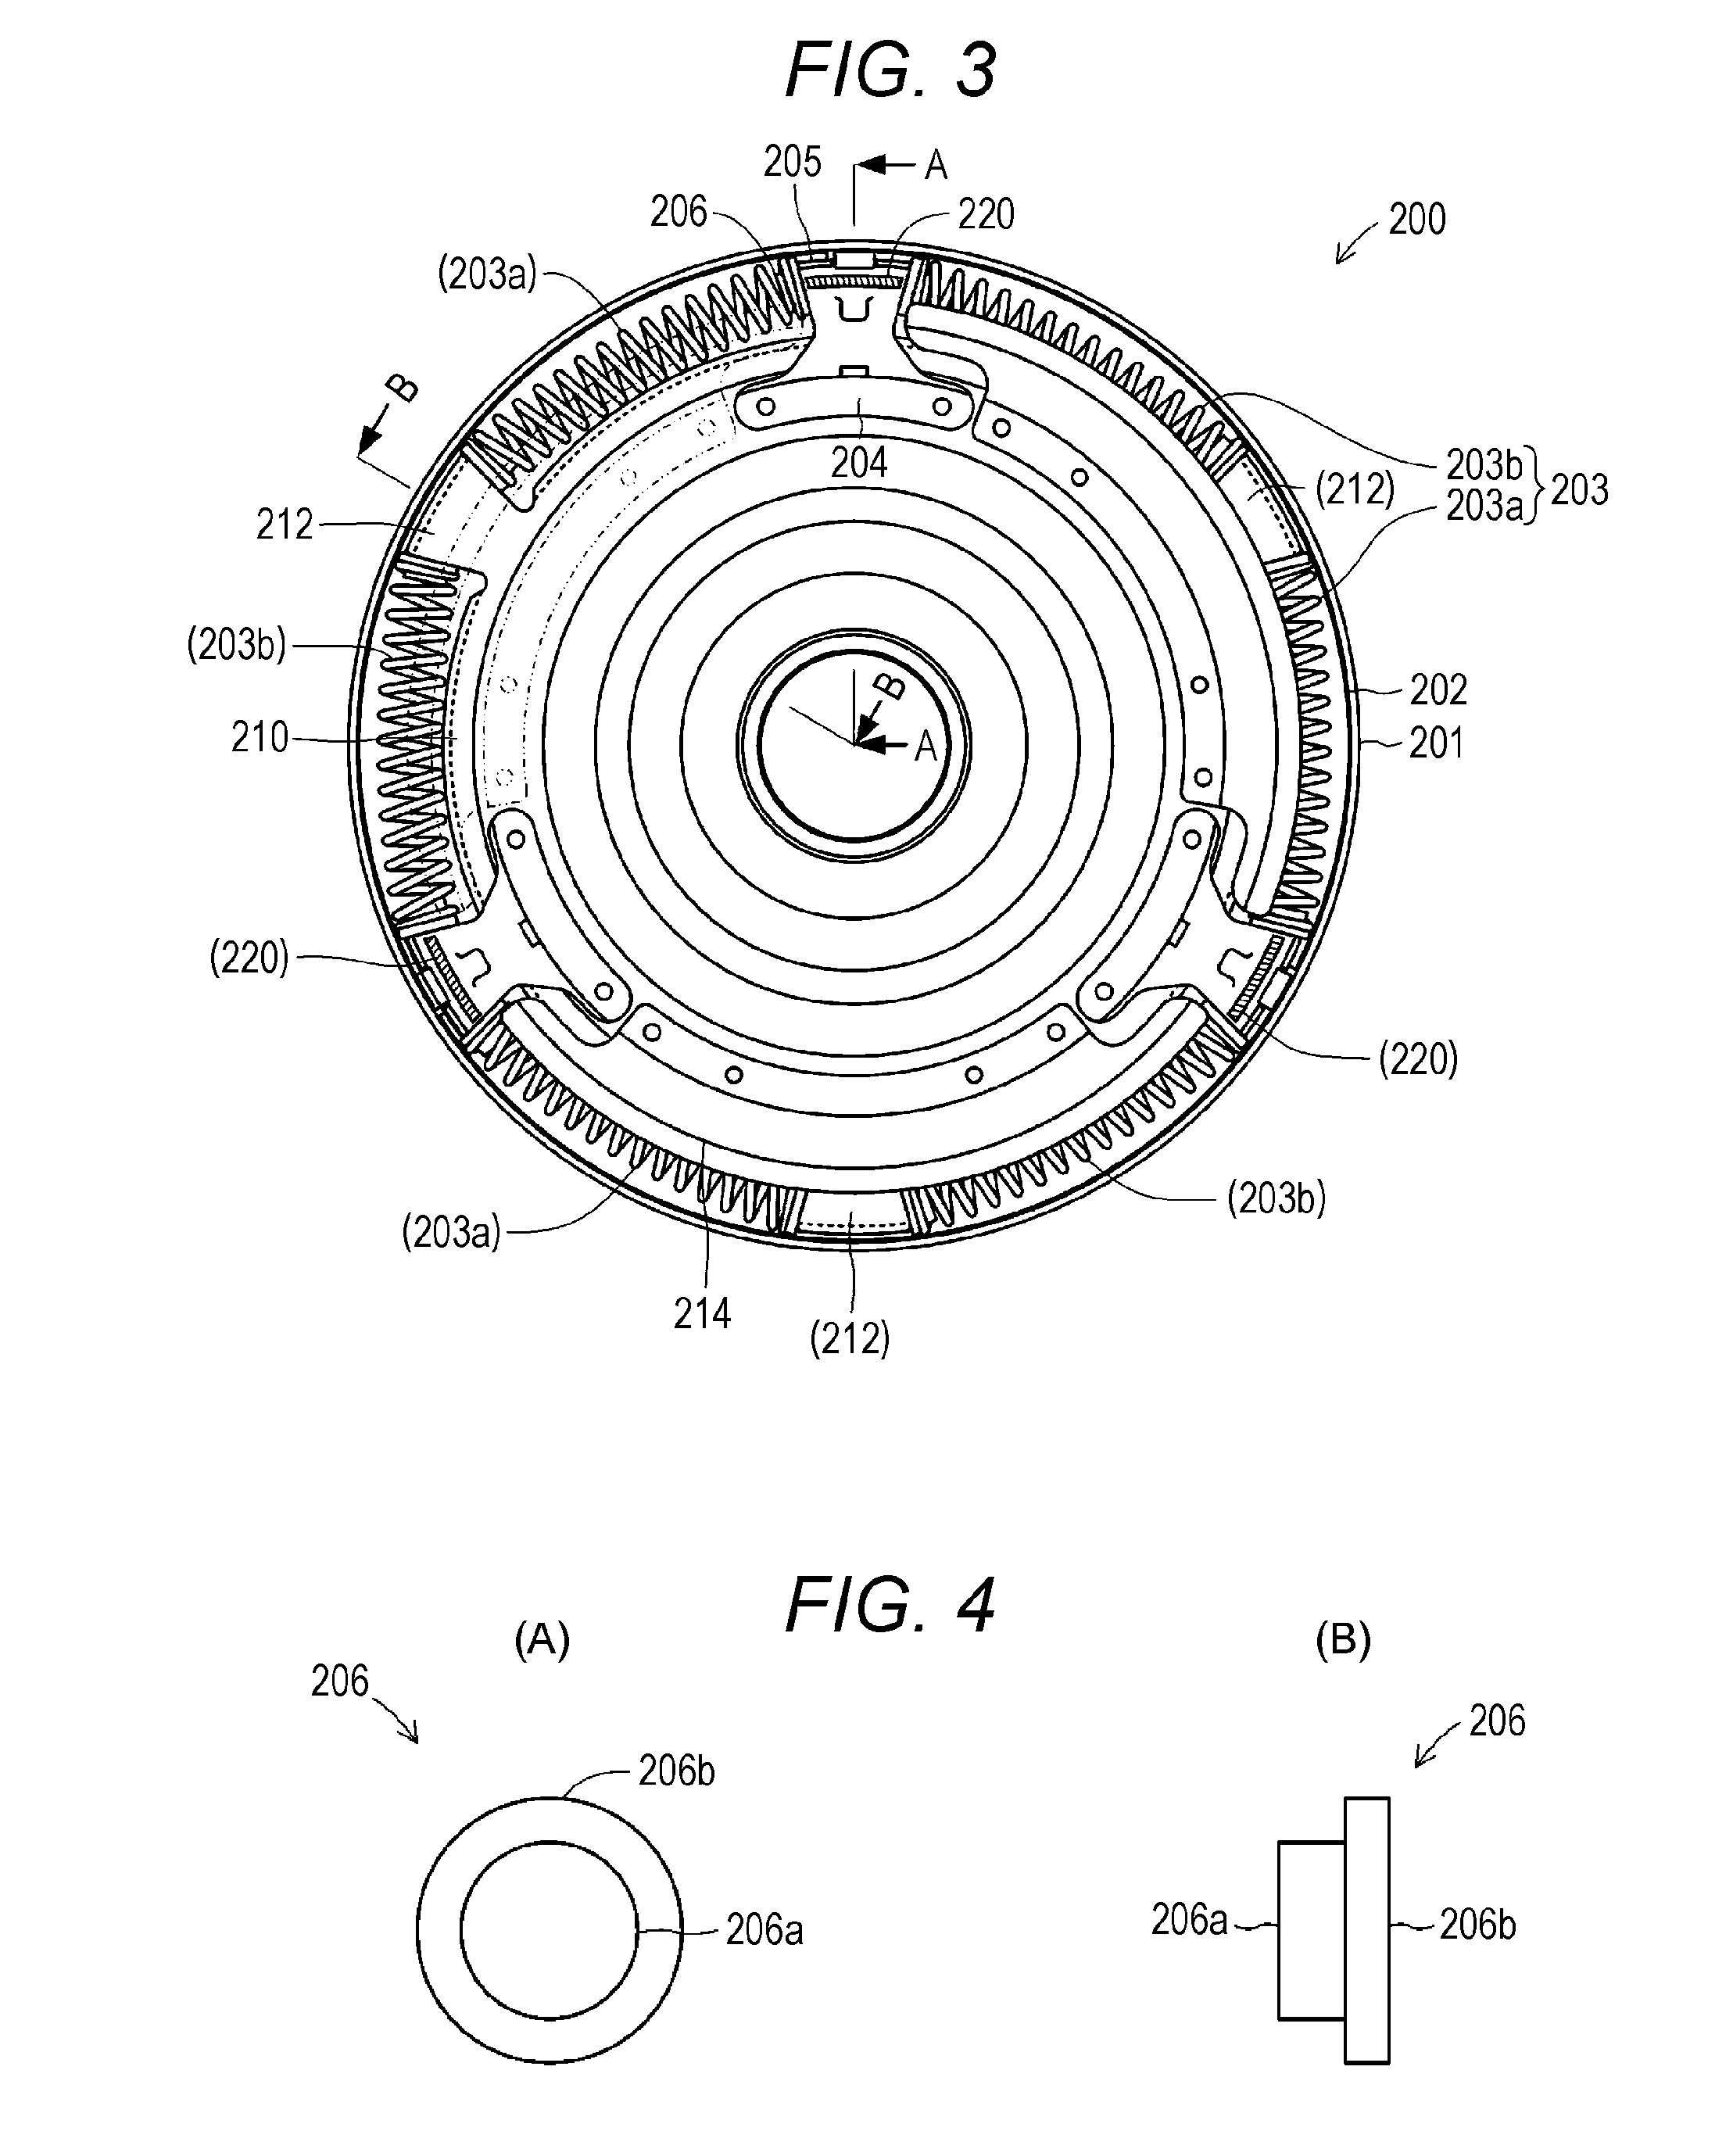 Lock-up device and torque converter